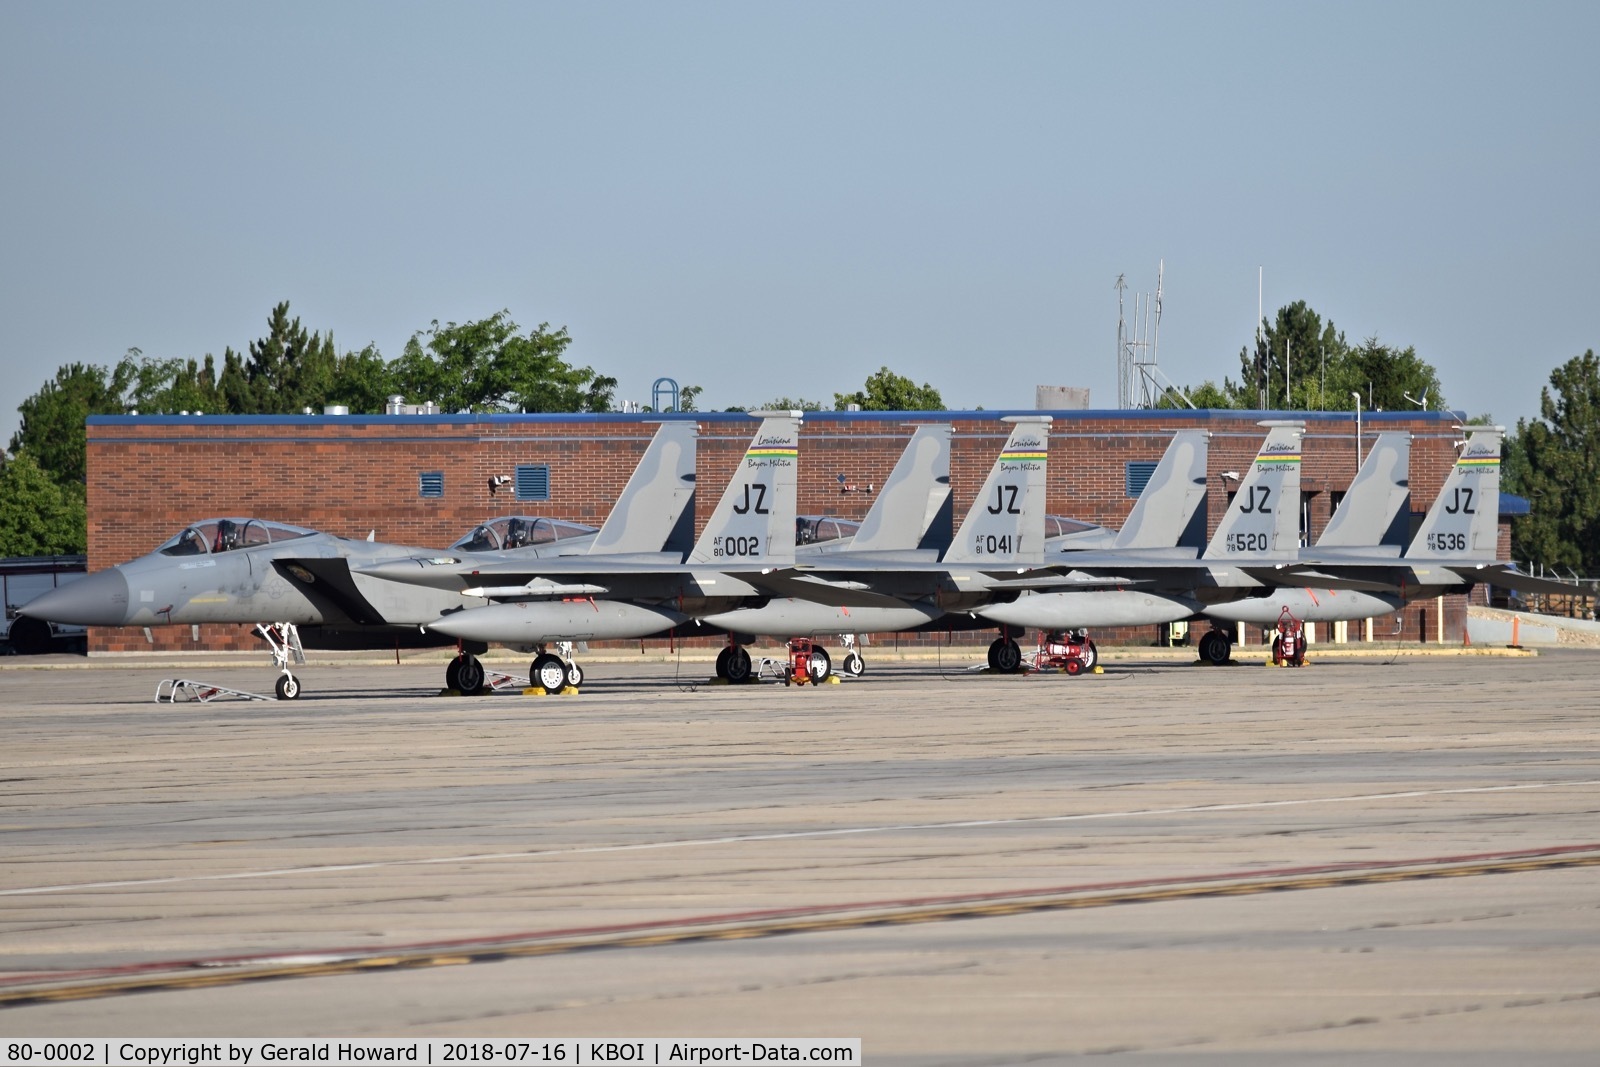 80-0002, 1980 McDonnell Douglas F-15C Eagle C/N 0635/C151, Parked with three other F-15Cs from the 122nd Fighter Wing 